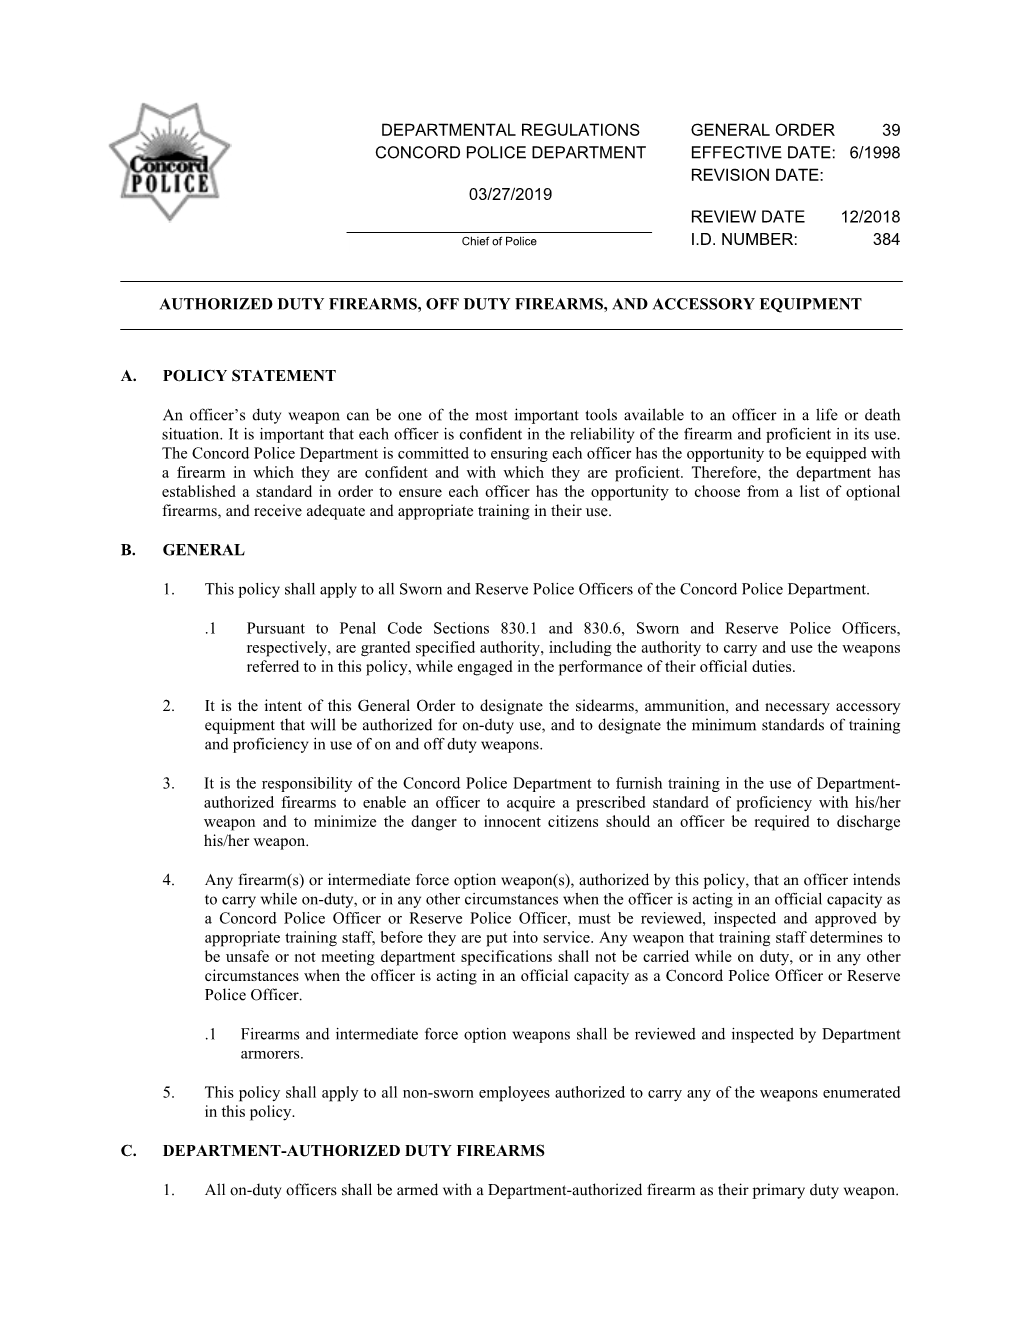 DEPARTMENTAL REGULATIONS GENERAL ORDER 39 CONCORD POLICE DEPARTMENT EFFECTIVE DATE: 6/1998 REVISION DATE: 03/27/2019 REVIEW DATE 12/2018 Chief of Police I.D